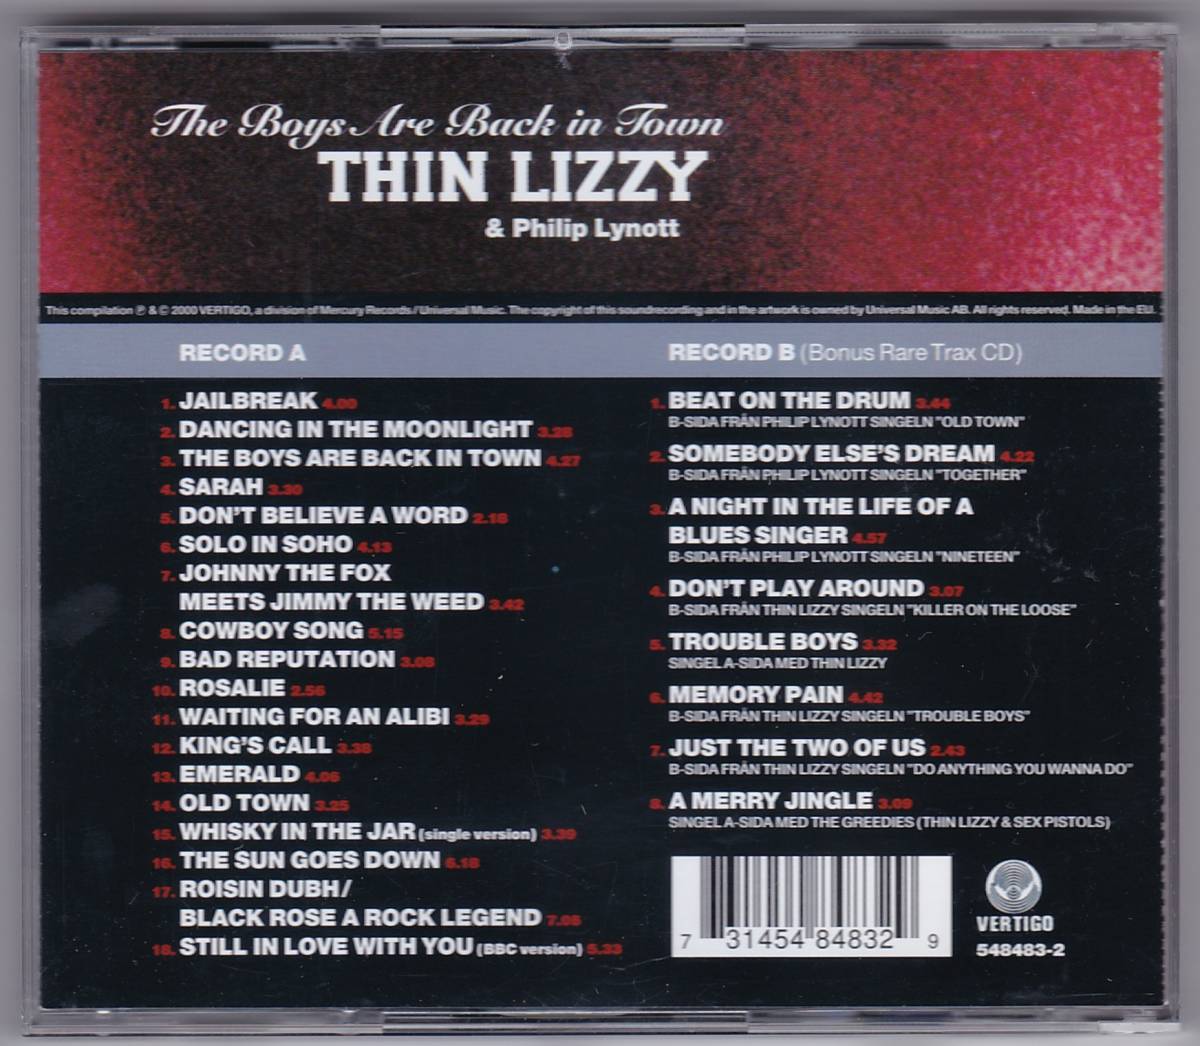  rare limitation 2 sheets set CD THIN LIZZY & PHILIP LYNOTT/THE BOYS ARE BACK IN TOWN (Swedish Collection) RARE!